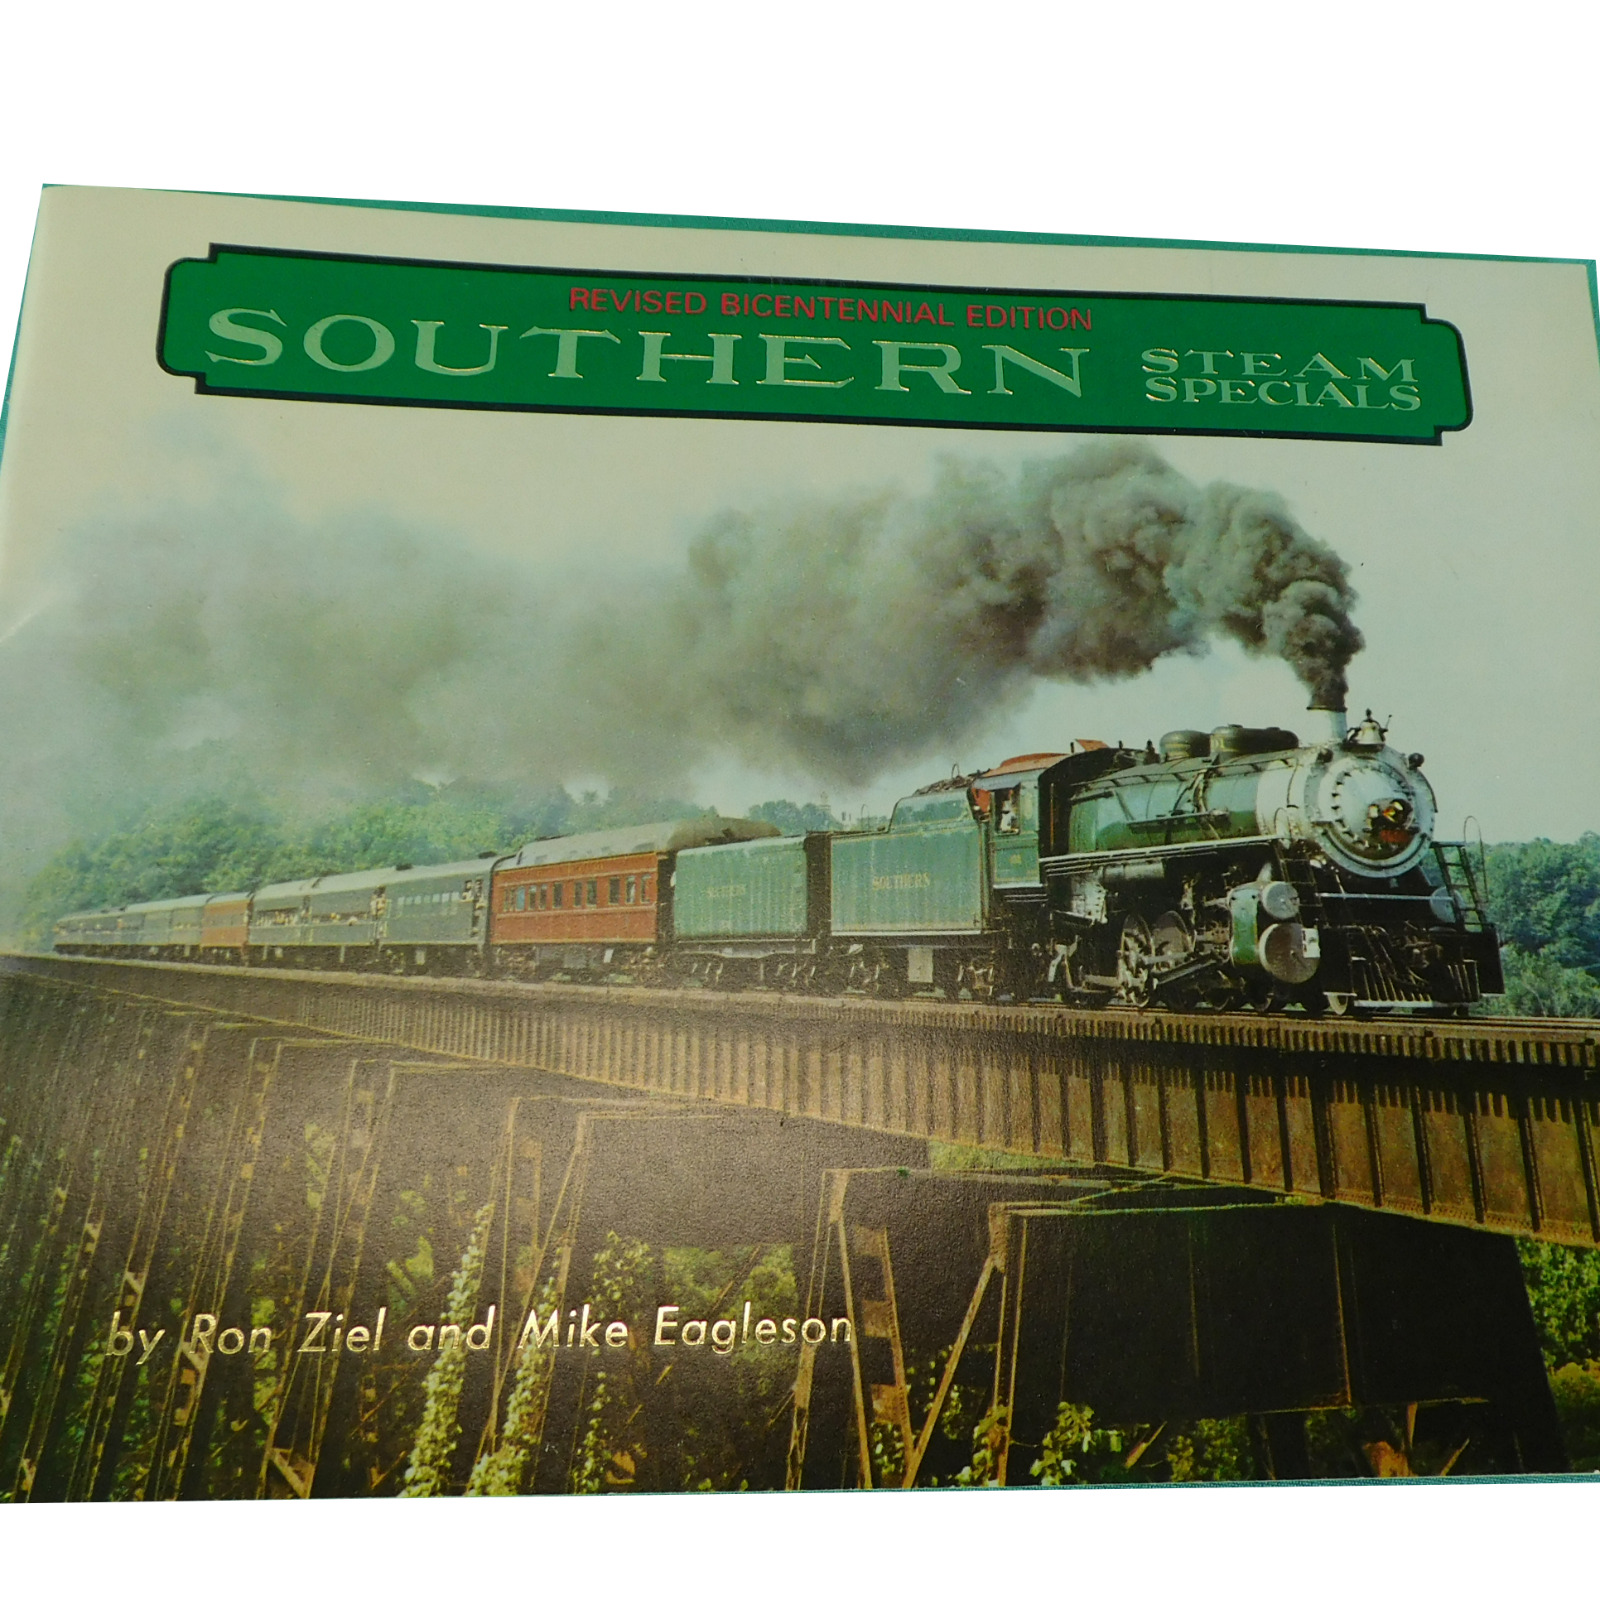 Southern Steam Special Revised Bicentennial Edition by Ron Ziel and Mike E. 